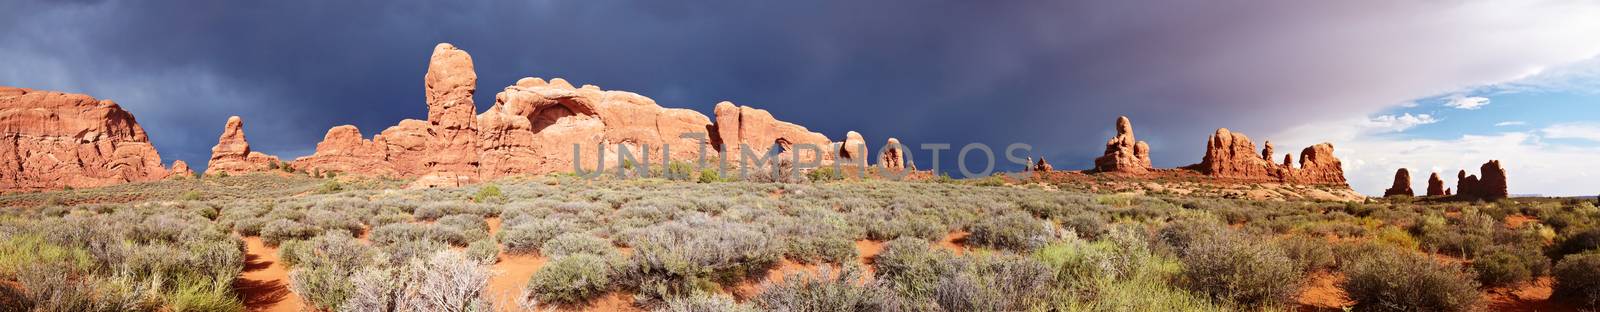 Desert after the Storm, panorama, Arches National Park, Utah, USA